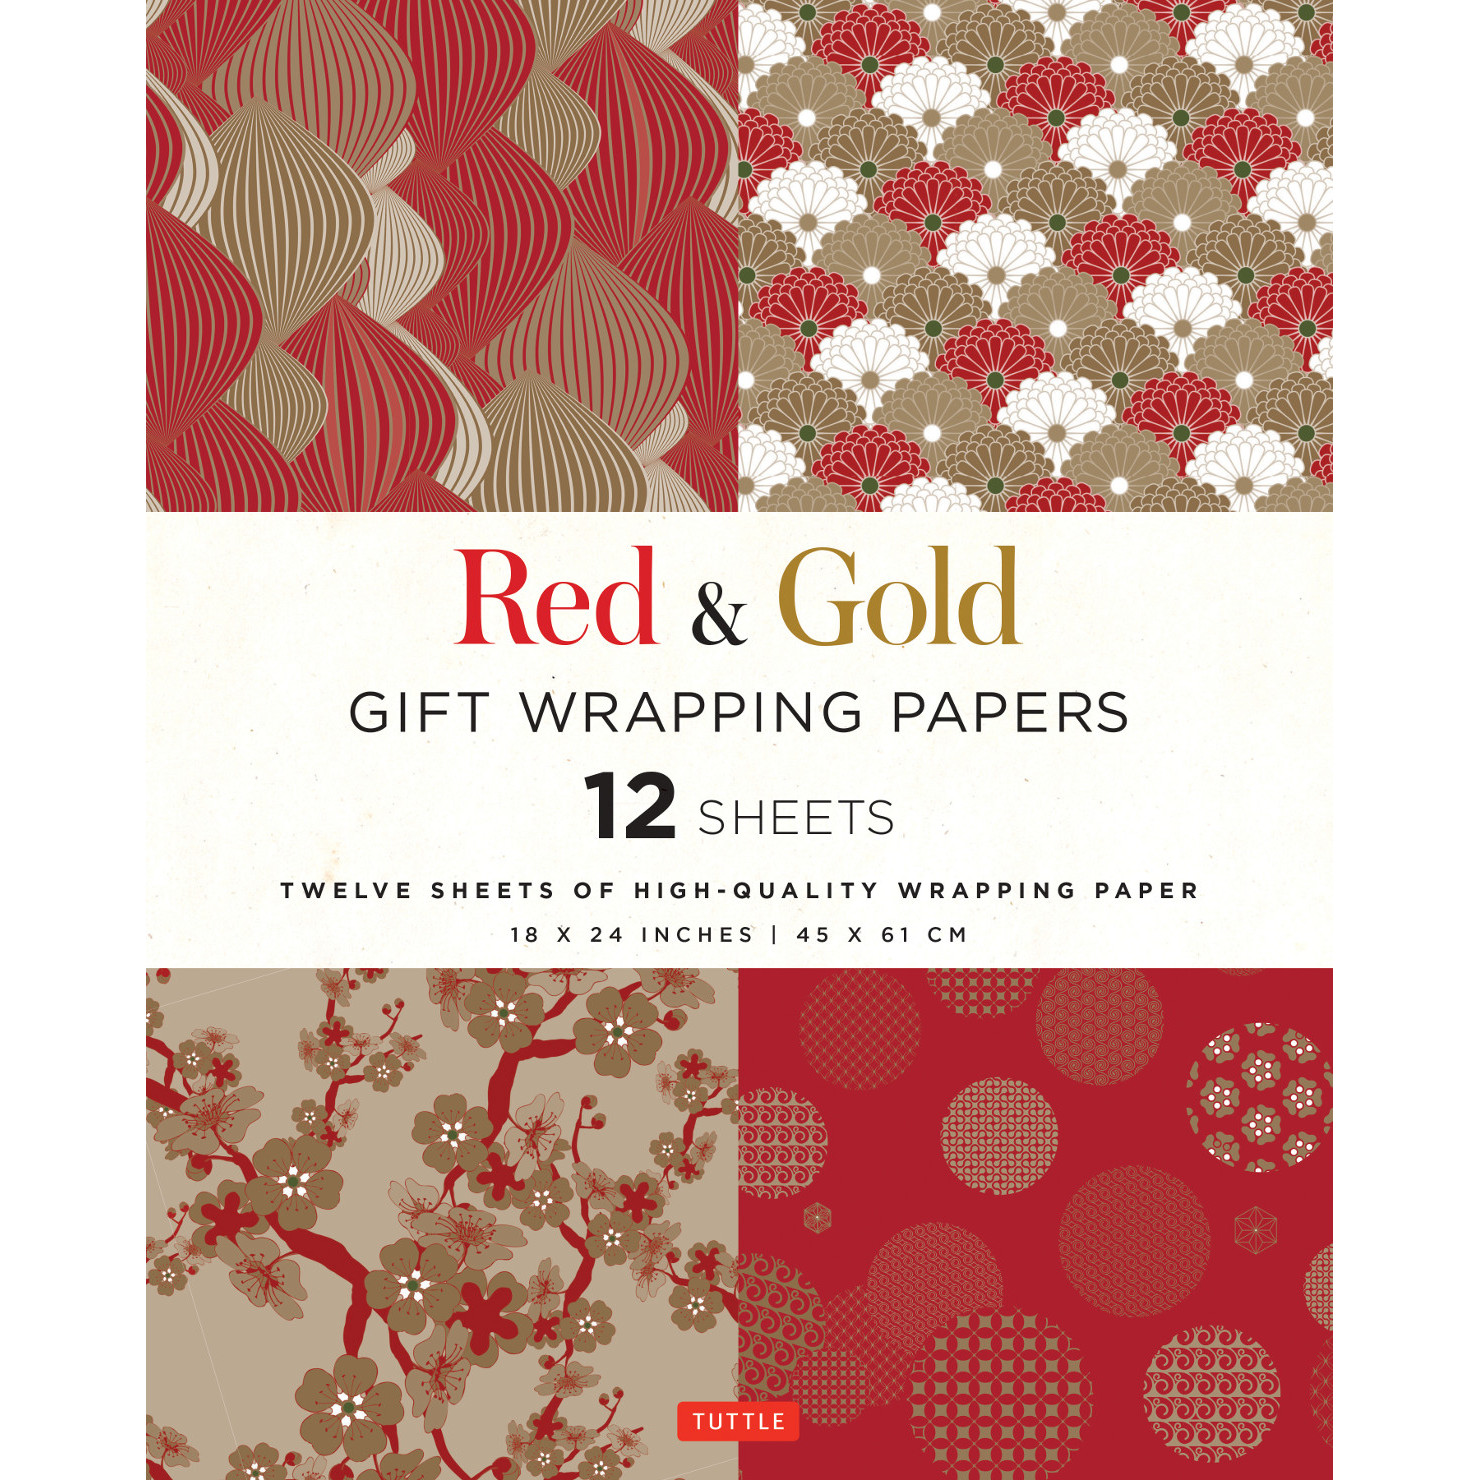 Black & Gold Gift Wrapping Papers - 12 Sheets (9780804852104)